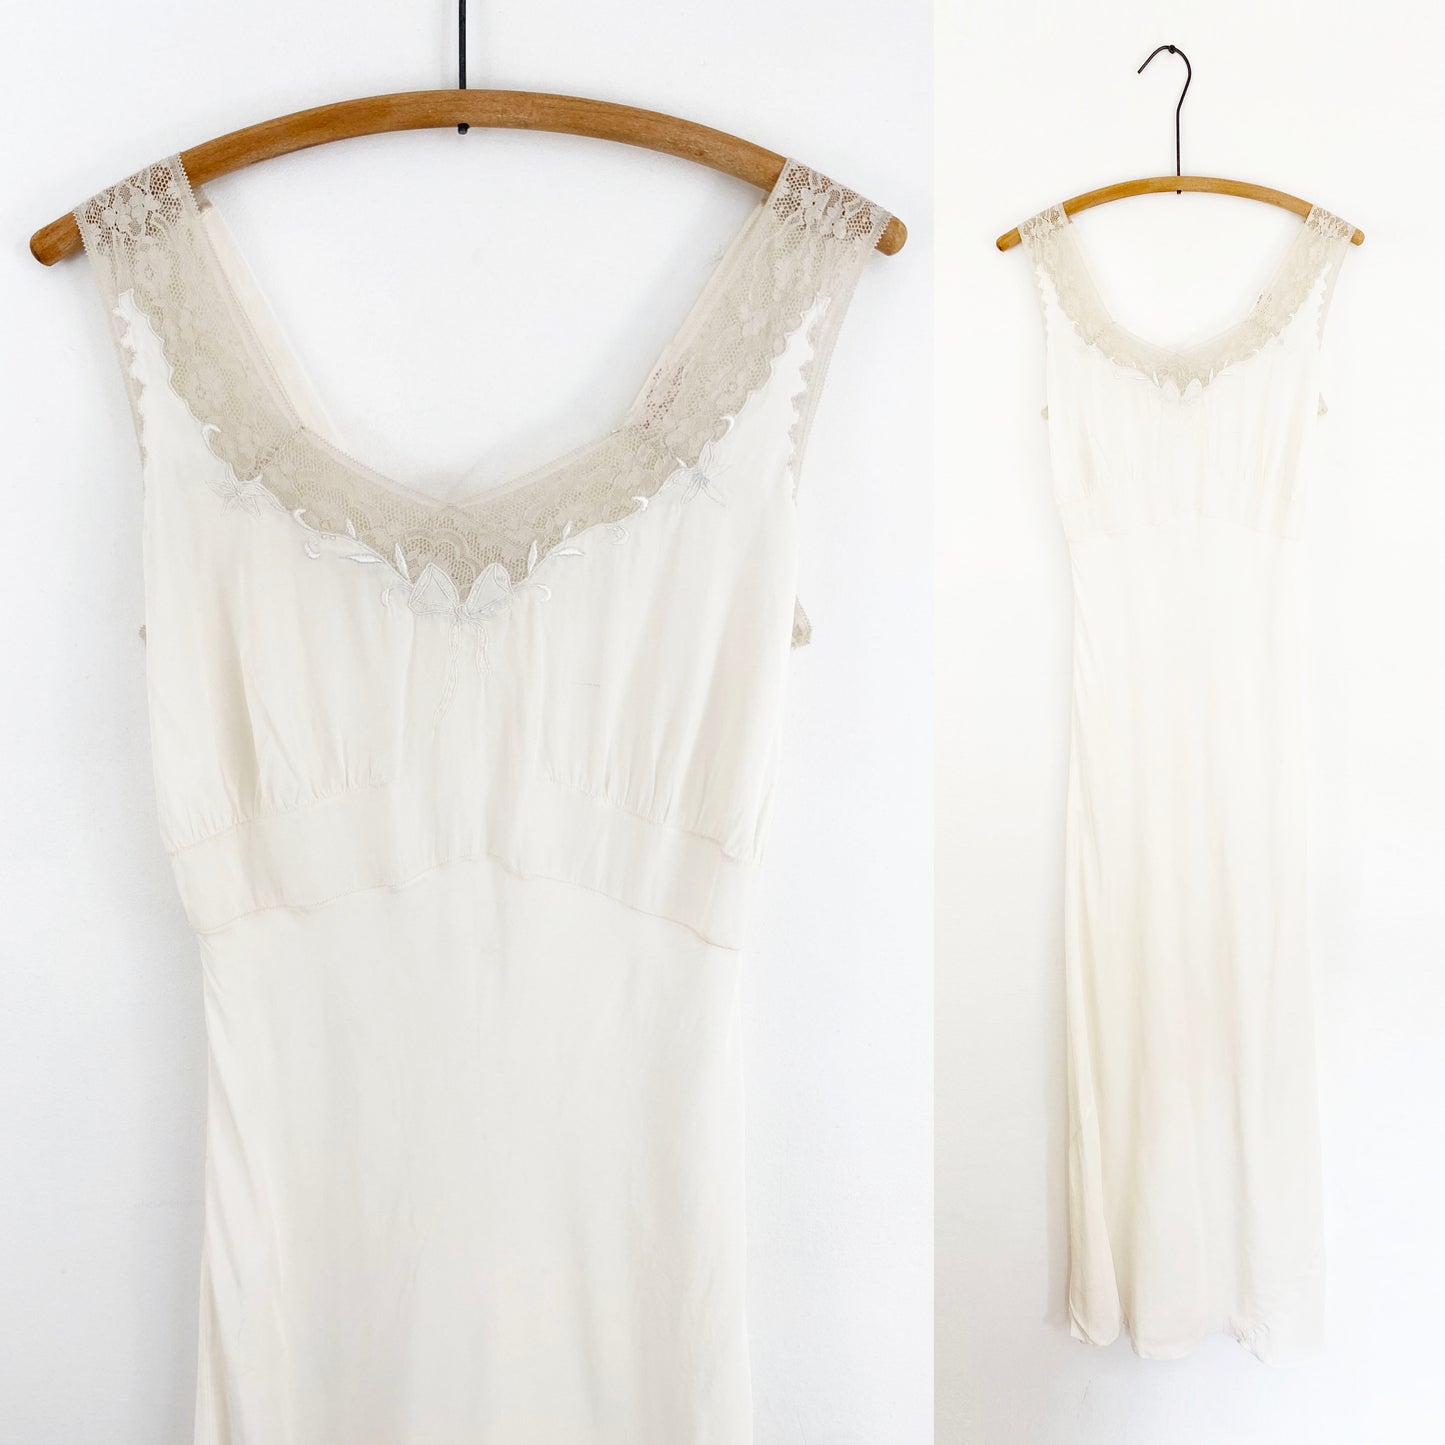 1940s Ivory White Bias Cut Silky Rayon Crepe Nightgown with Lace Trim Maxi Slip Bow Embroidery / Caramita / Small 4